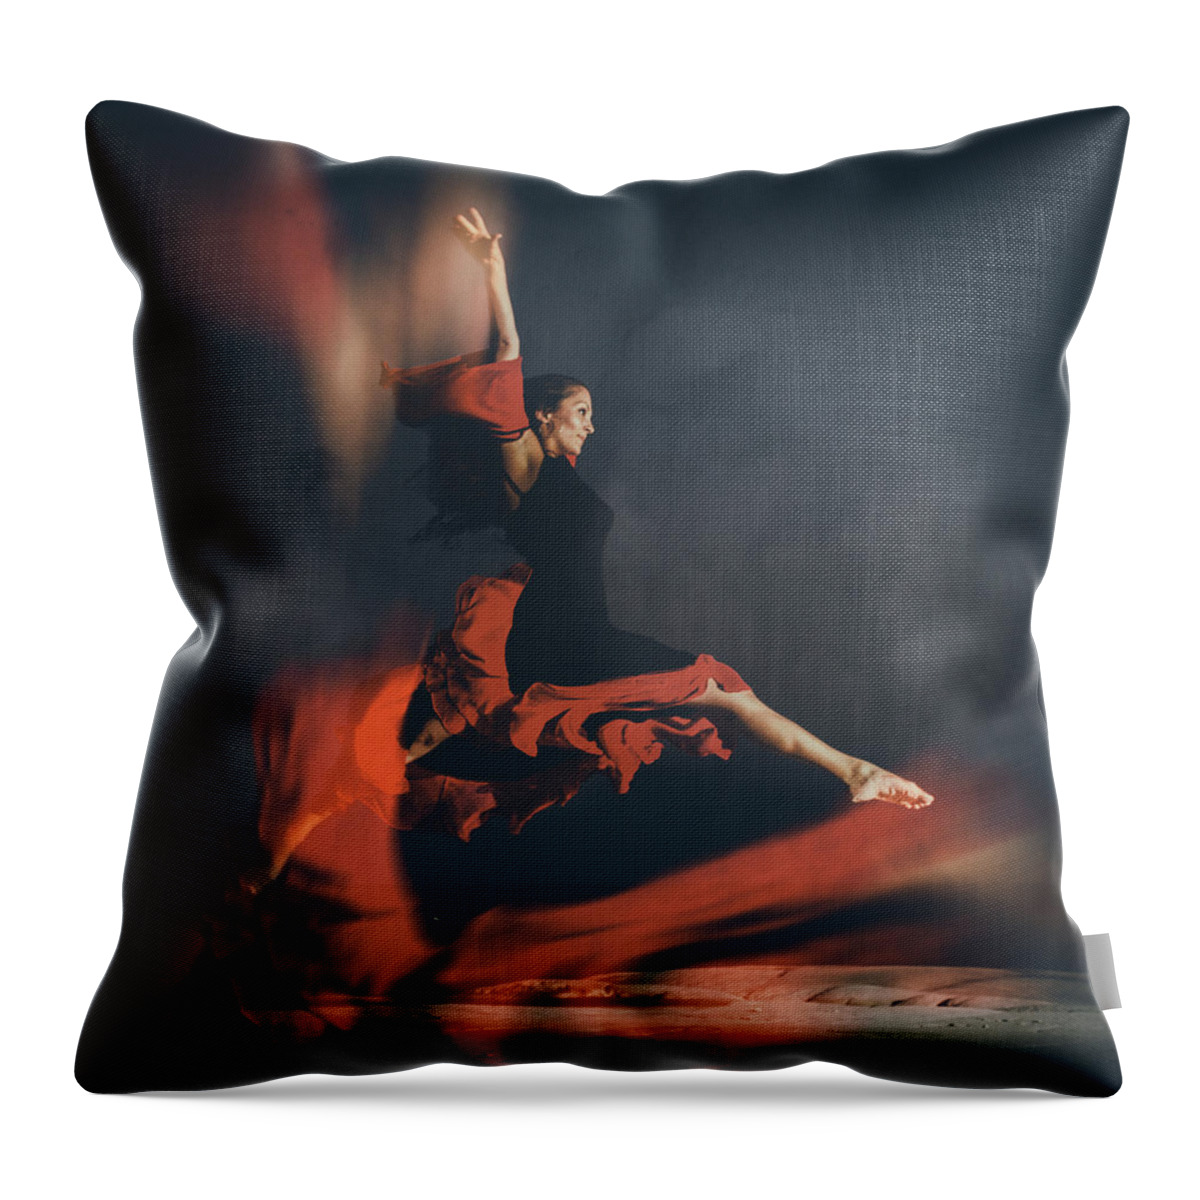 Adult Throw Pillow featuring the photograph Latin Dancer by Stelios Kleanthous